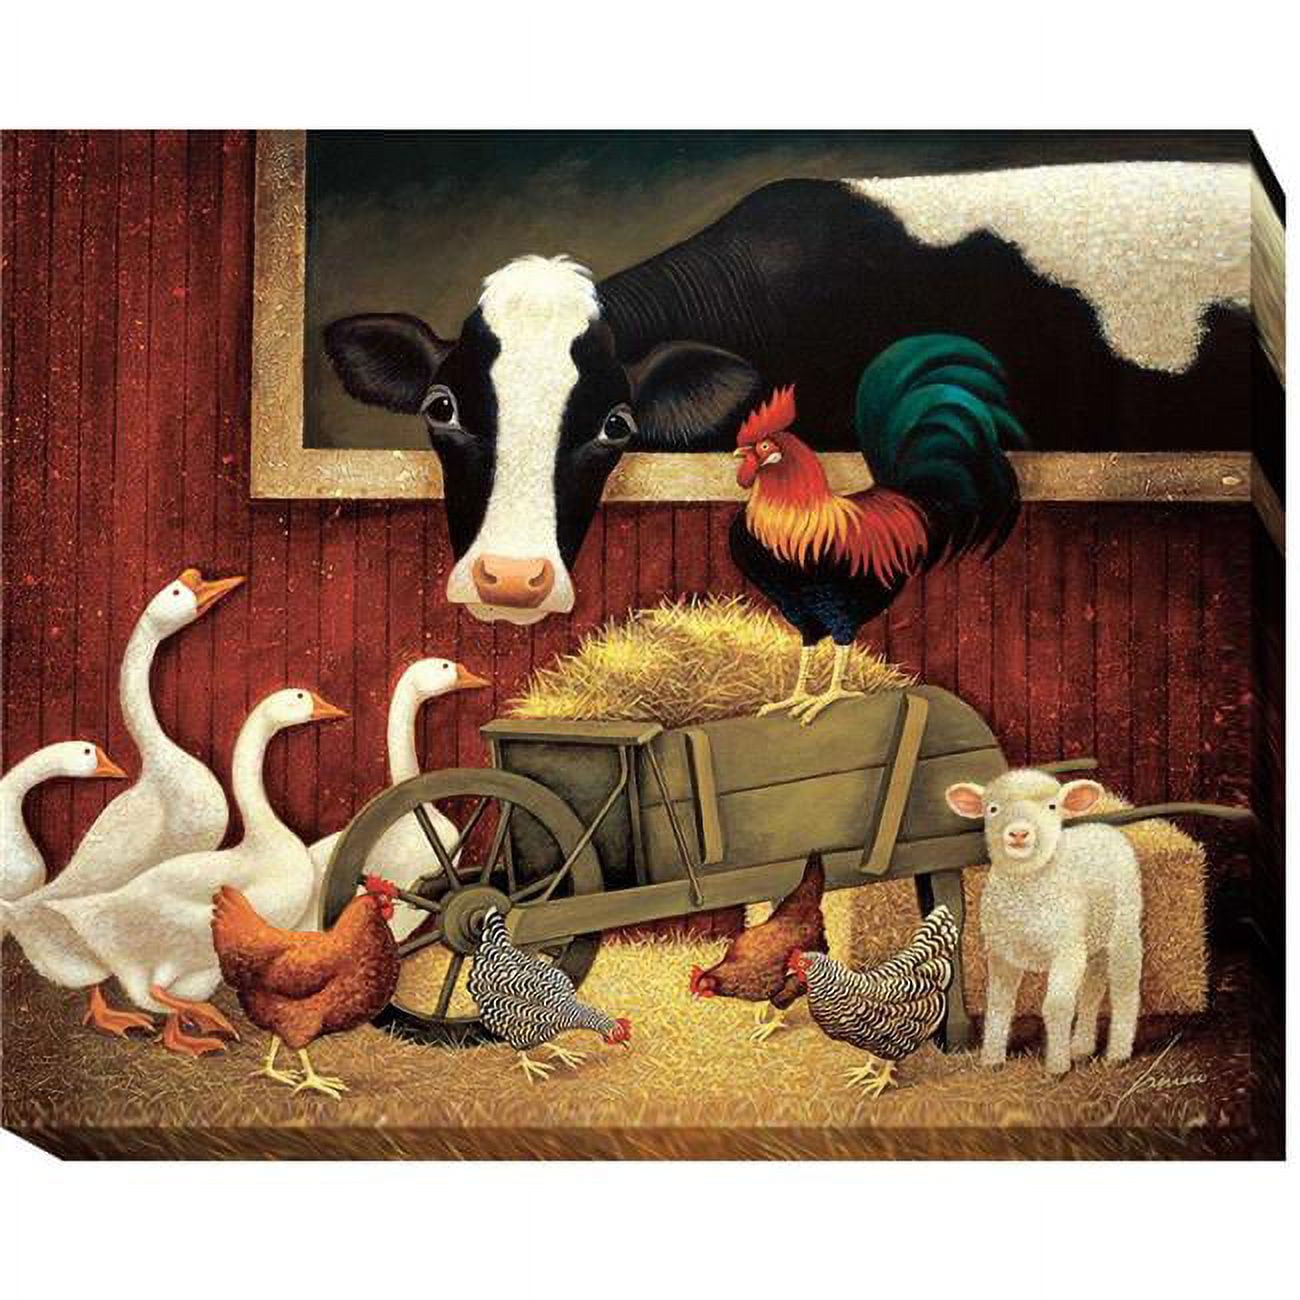 1215p758ig All My Friends By Lowell Herrero Premium Gallery-wrapped Canvas Giclee Art - 12 X 15 X 1.5 In.